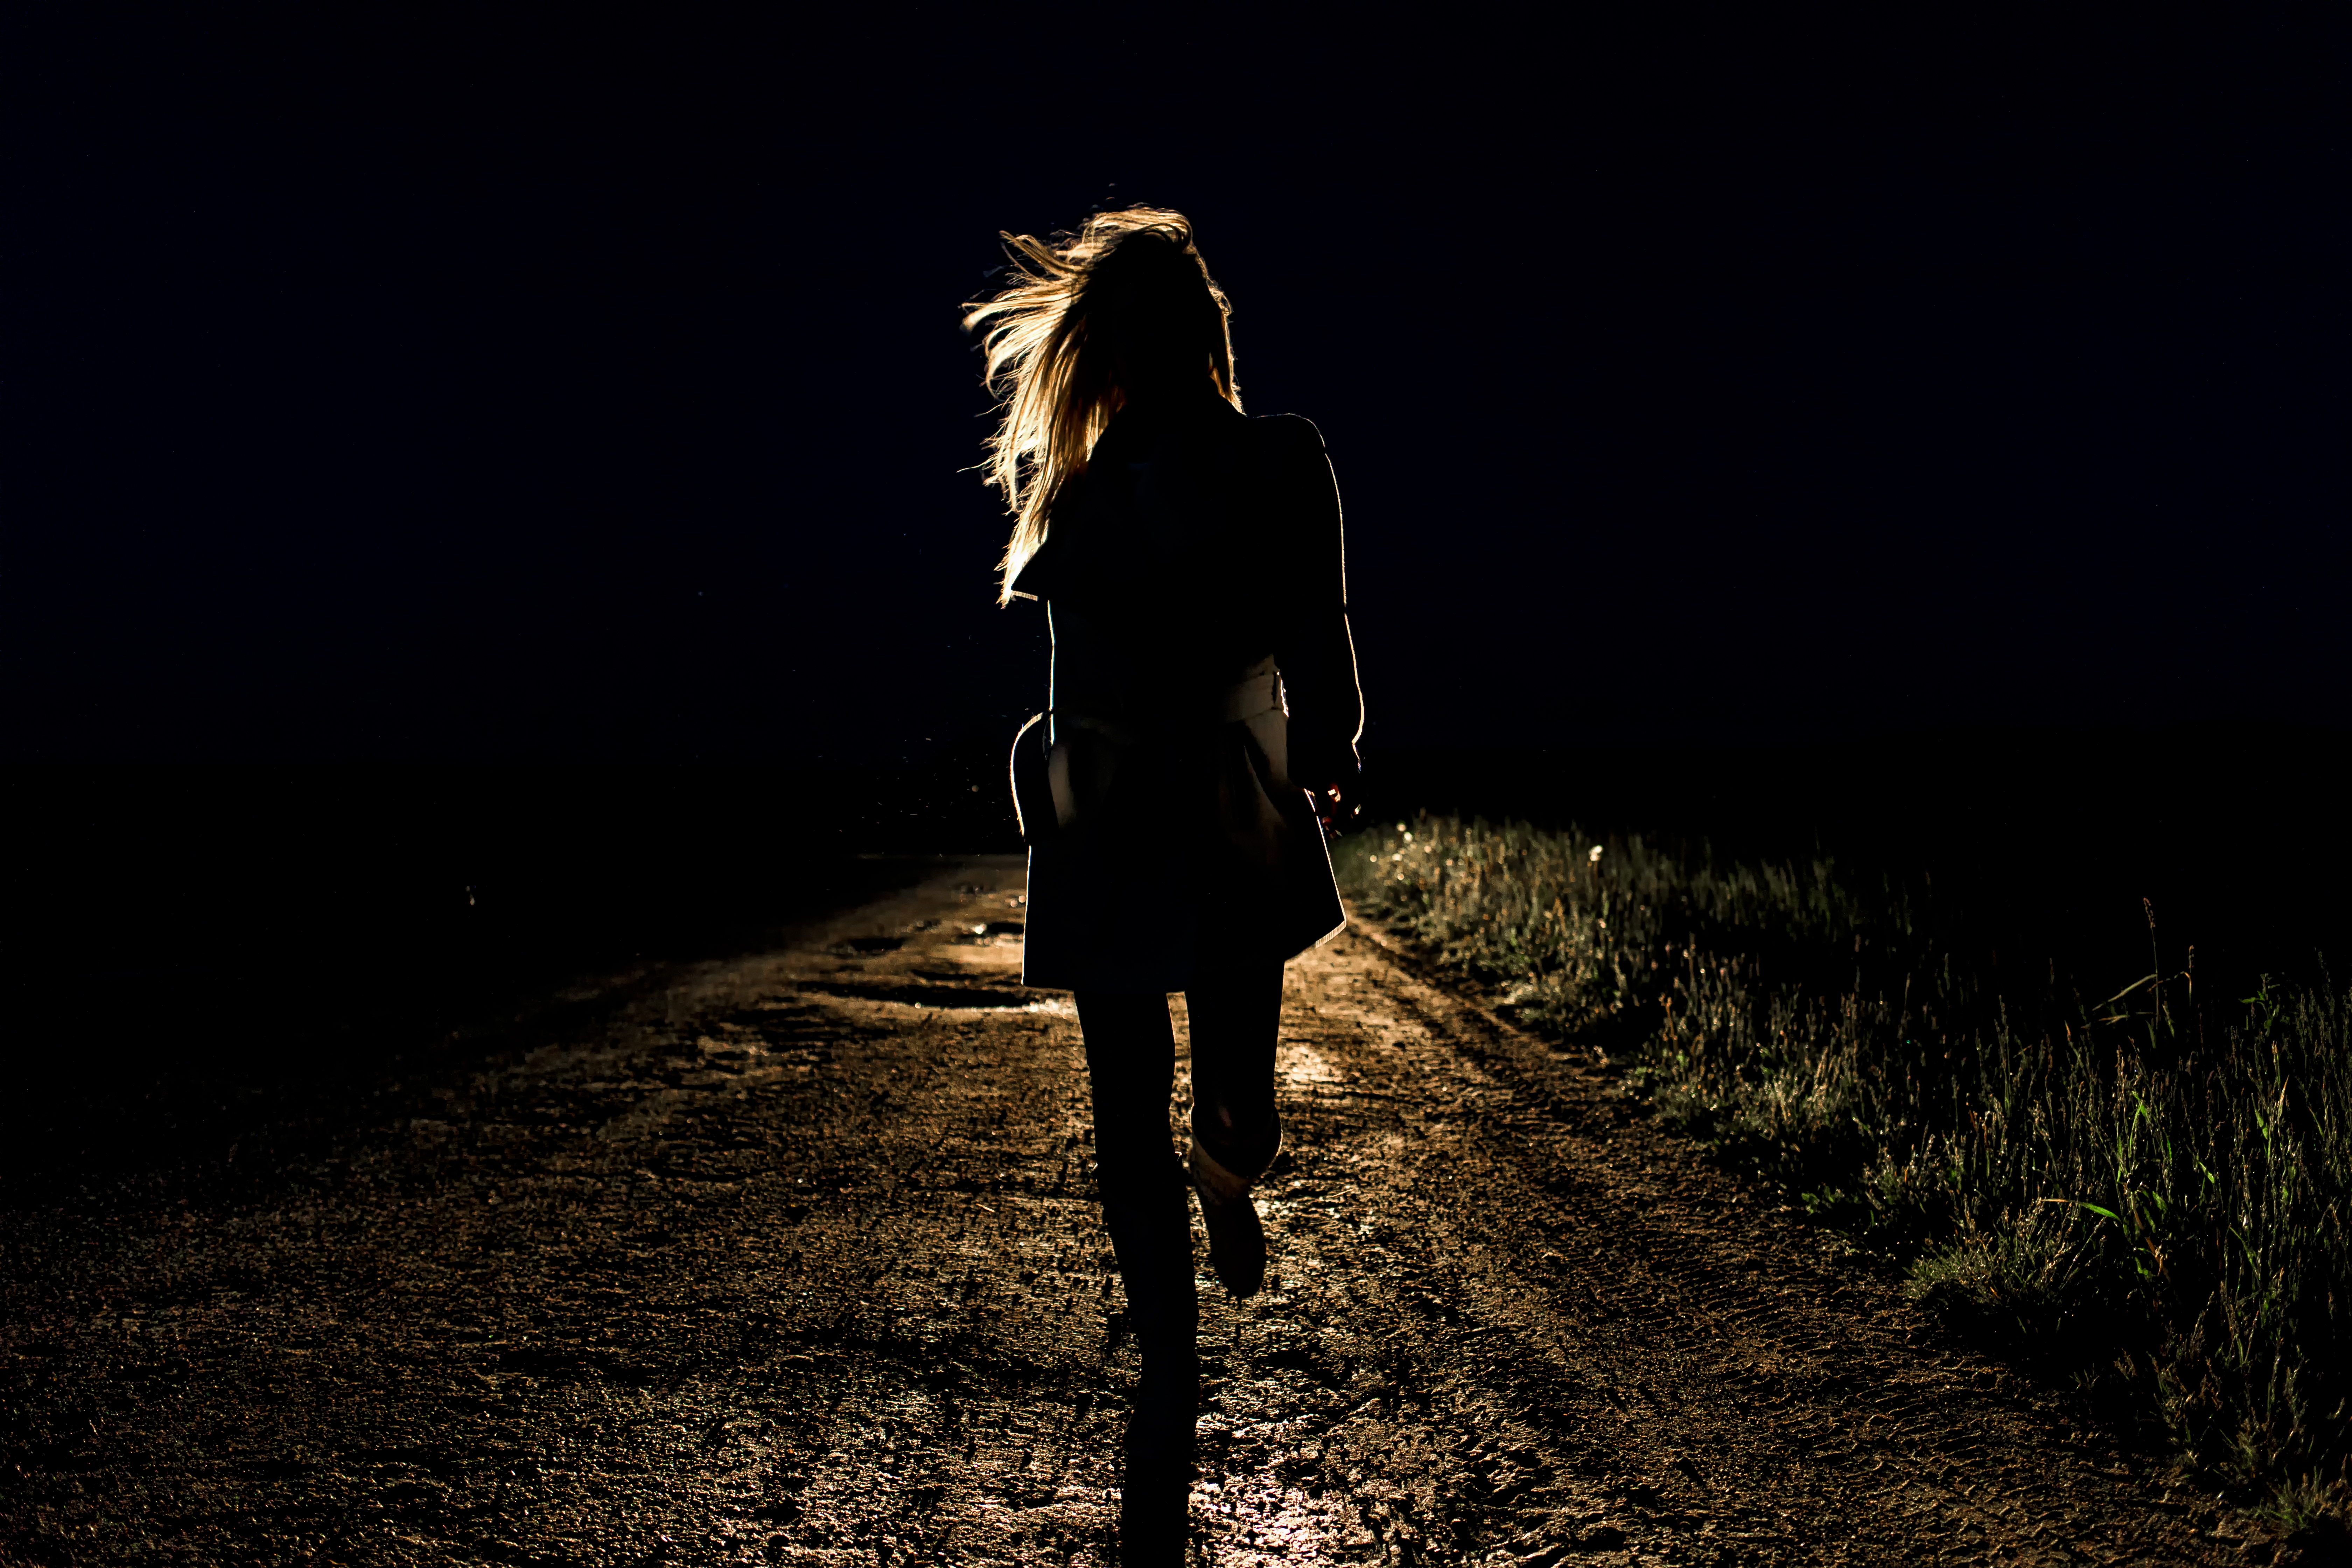 Lonely woman running away from car at night | Source: Shutterstock.com